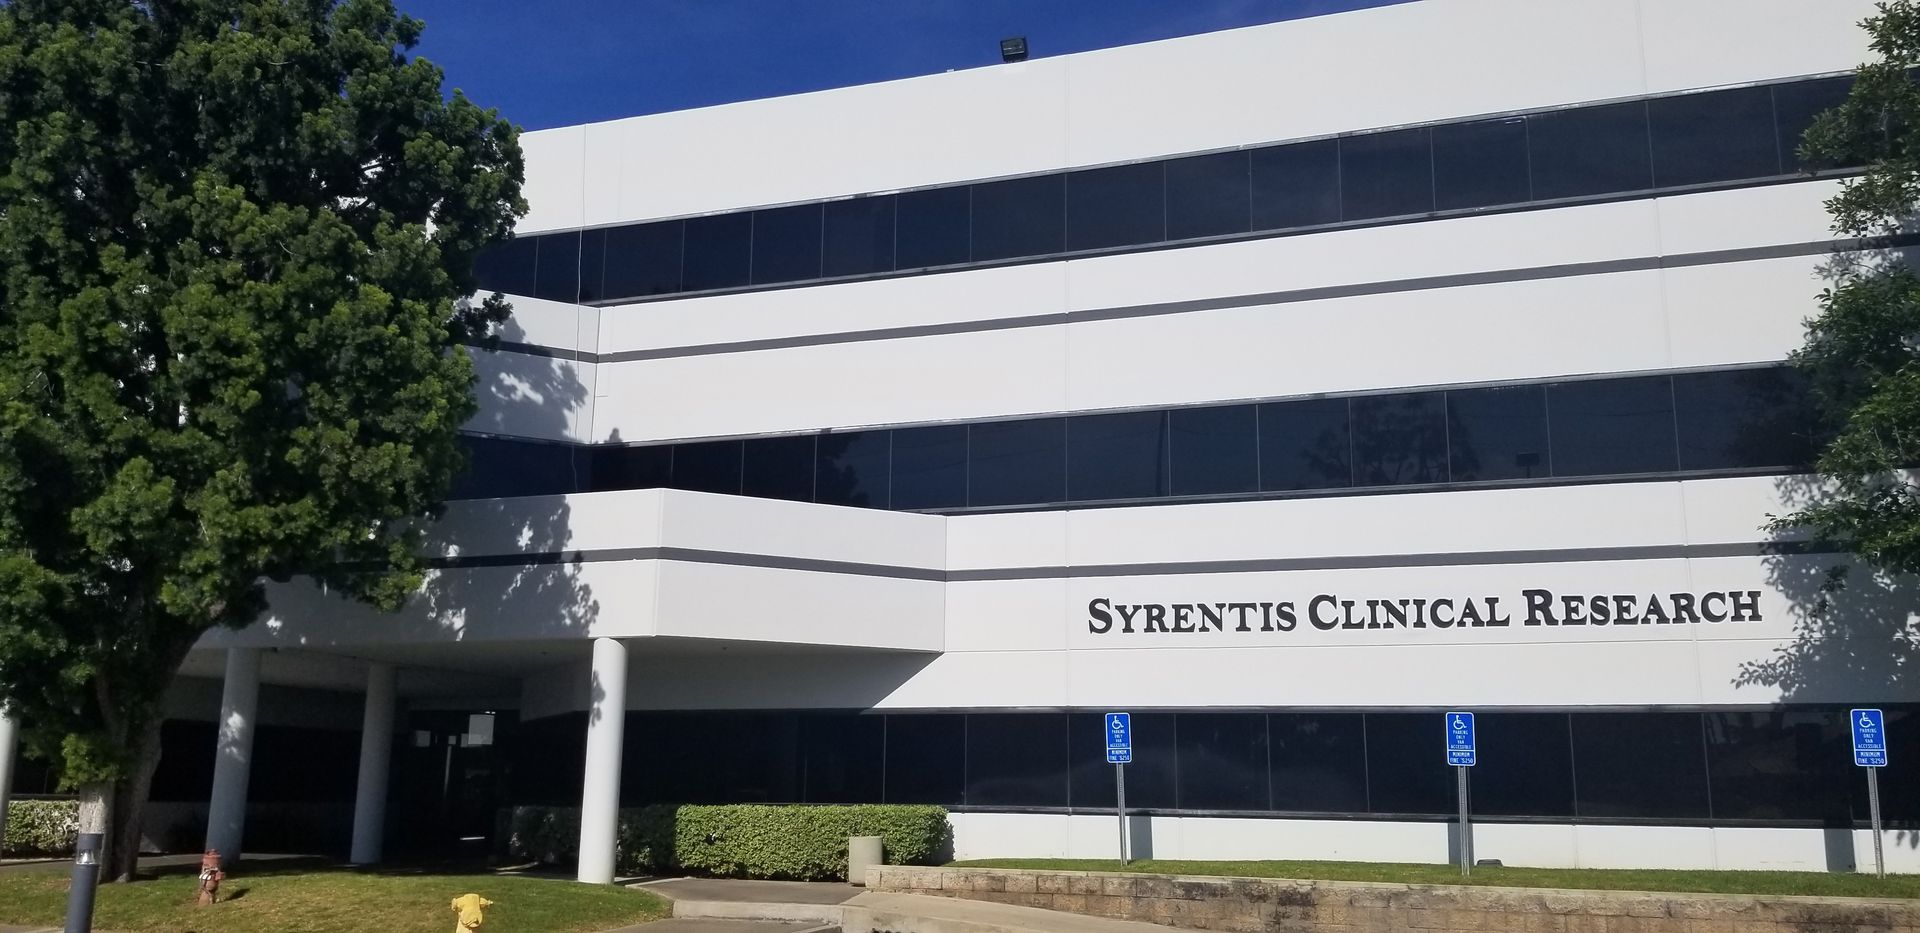 Syrentis Clinical Research building